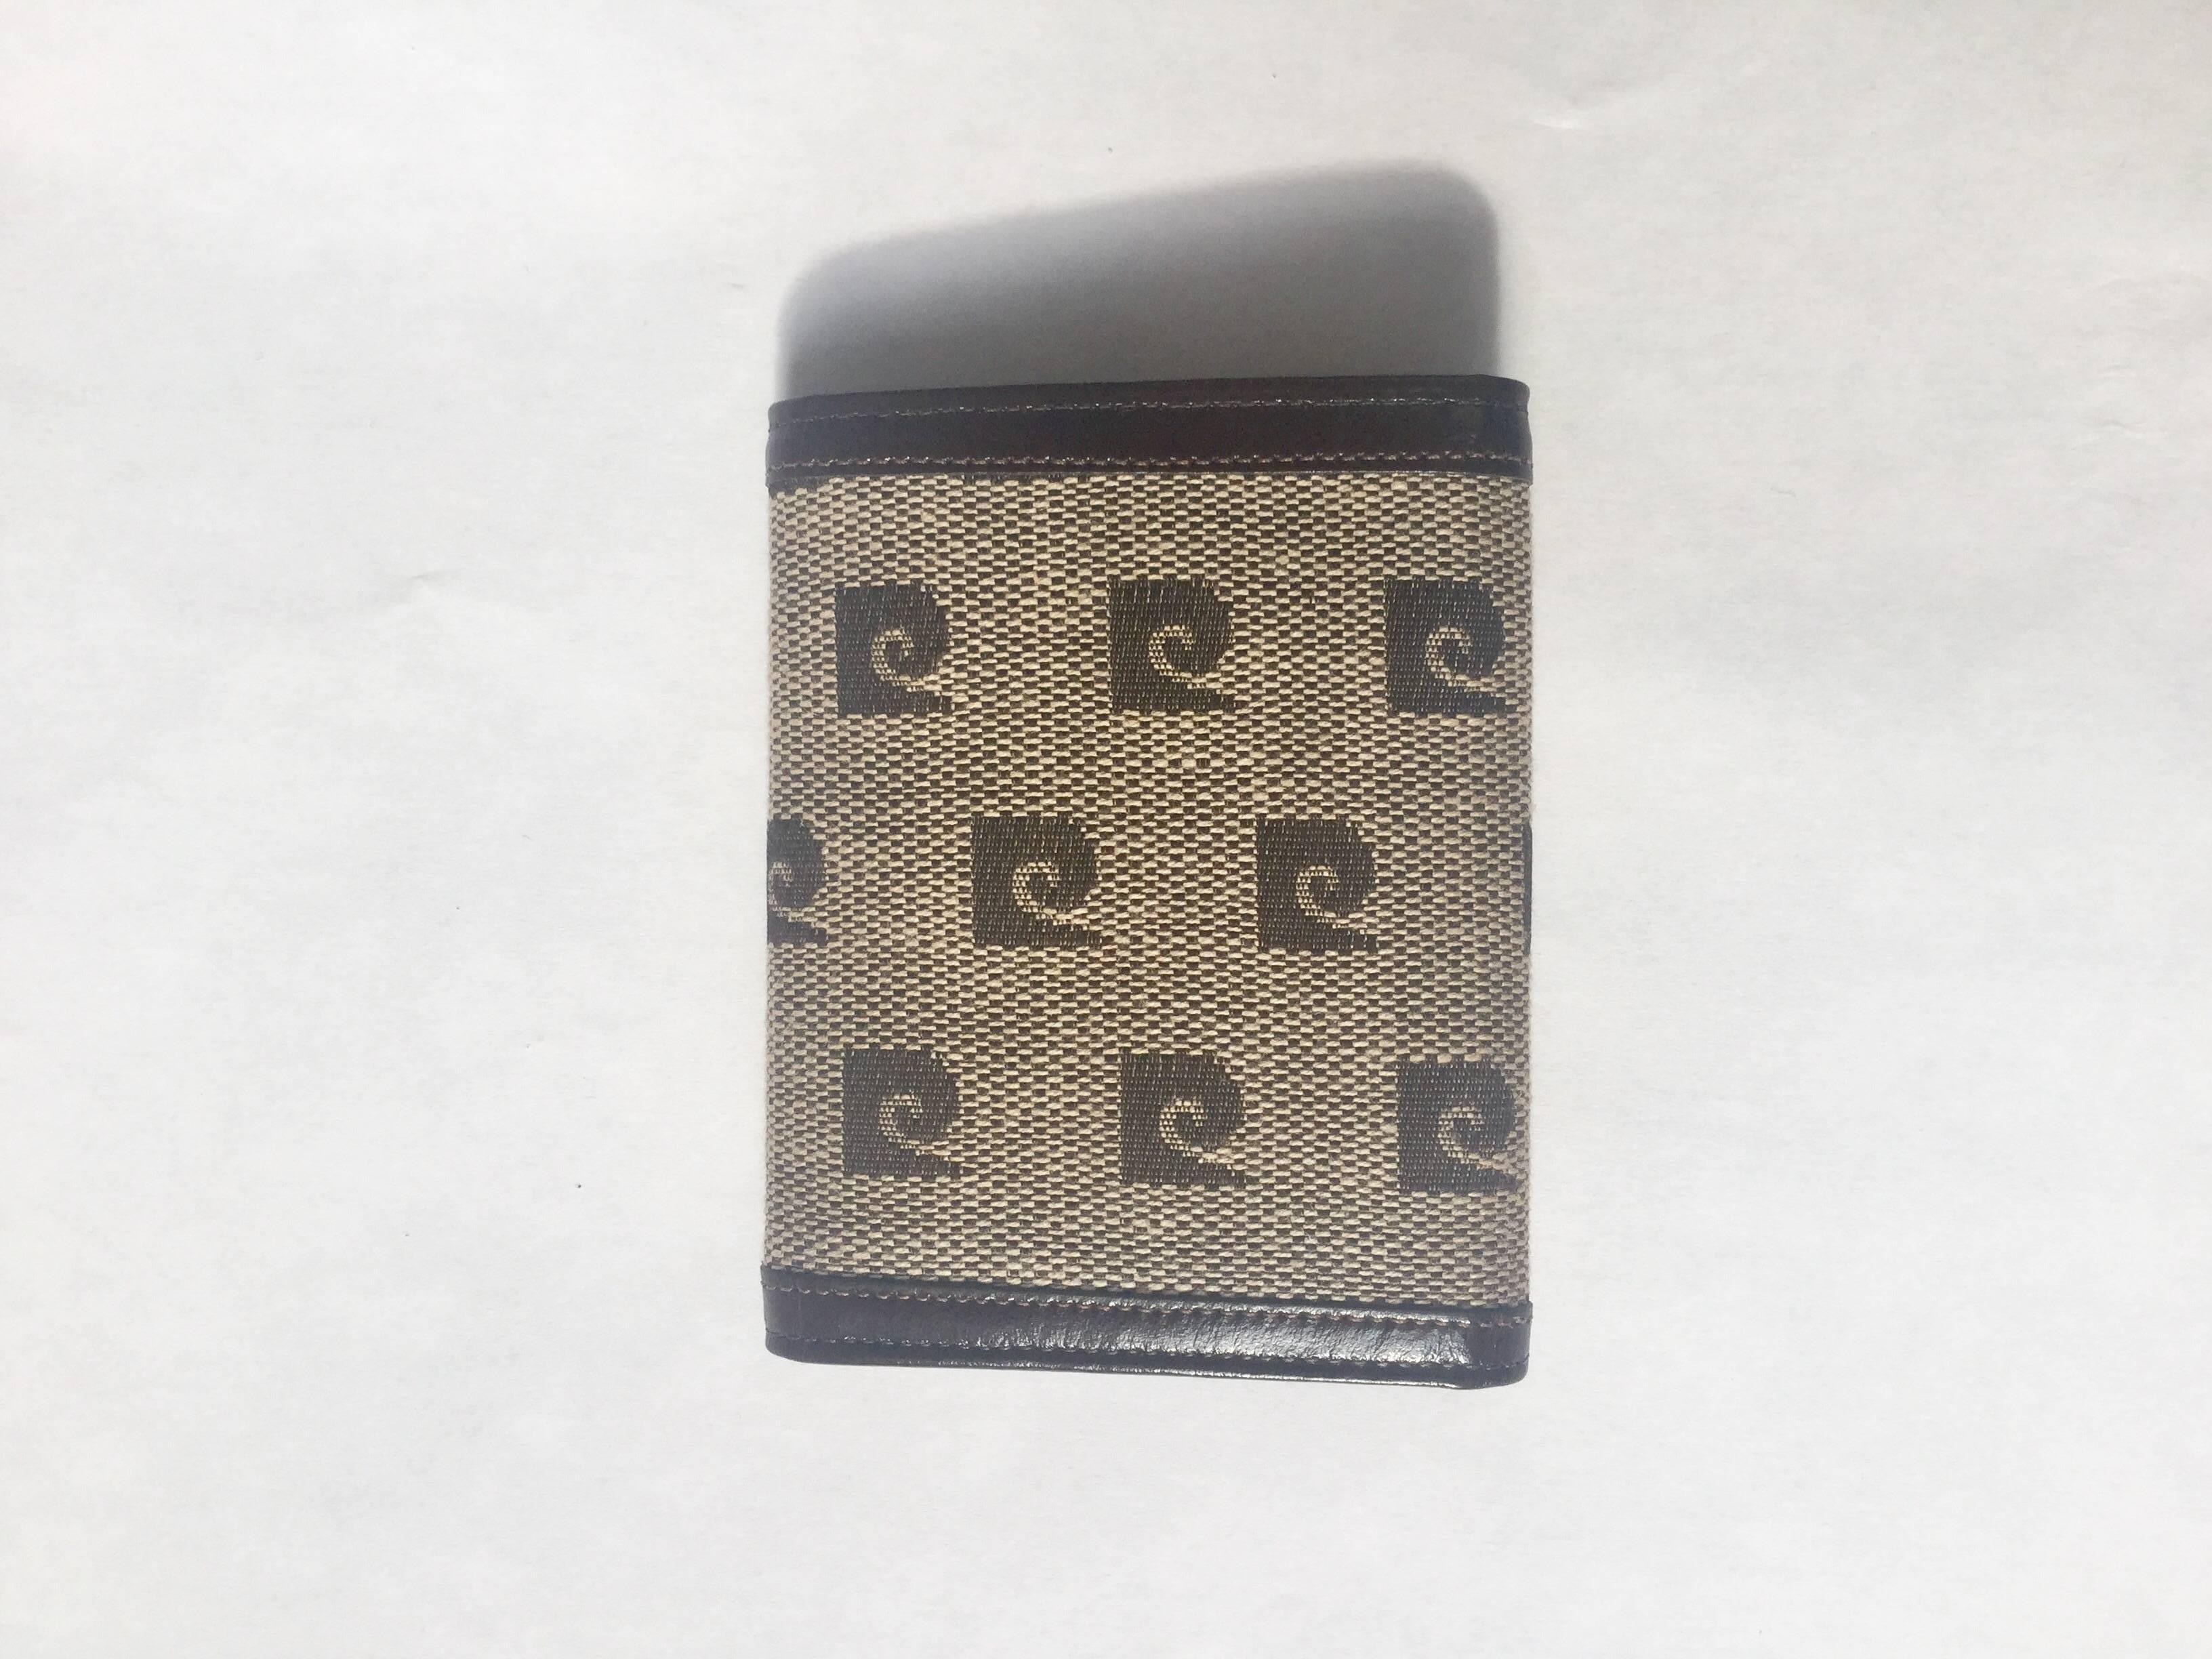 1970s Pierre Cardin Wallet. Paris New York. Logo Design. Leather Design. Never Used Still wth tags / Excellent Condition. 
Measurements: 4 x 3 inches